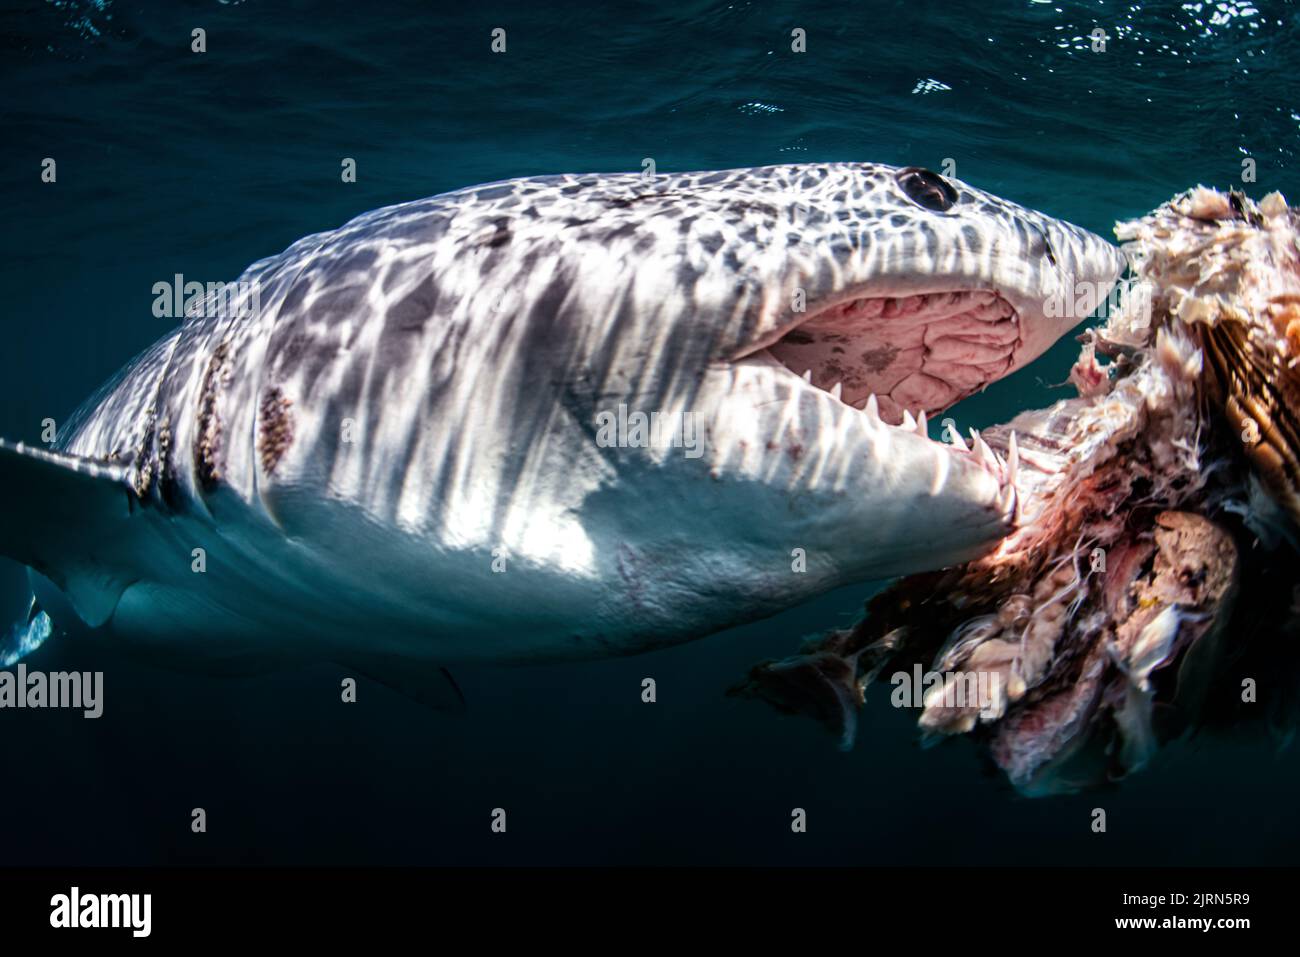 The mako shark reaches for its meal.California, US: THIS PHOTO showing a shark ripping its bloody meal to shreds would terrify most people yet these m Stock Photo